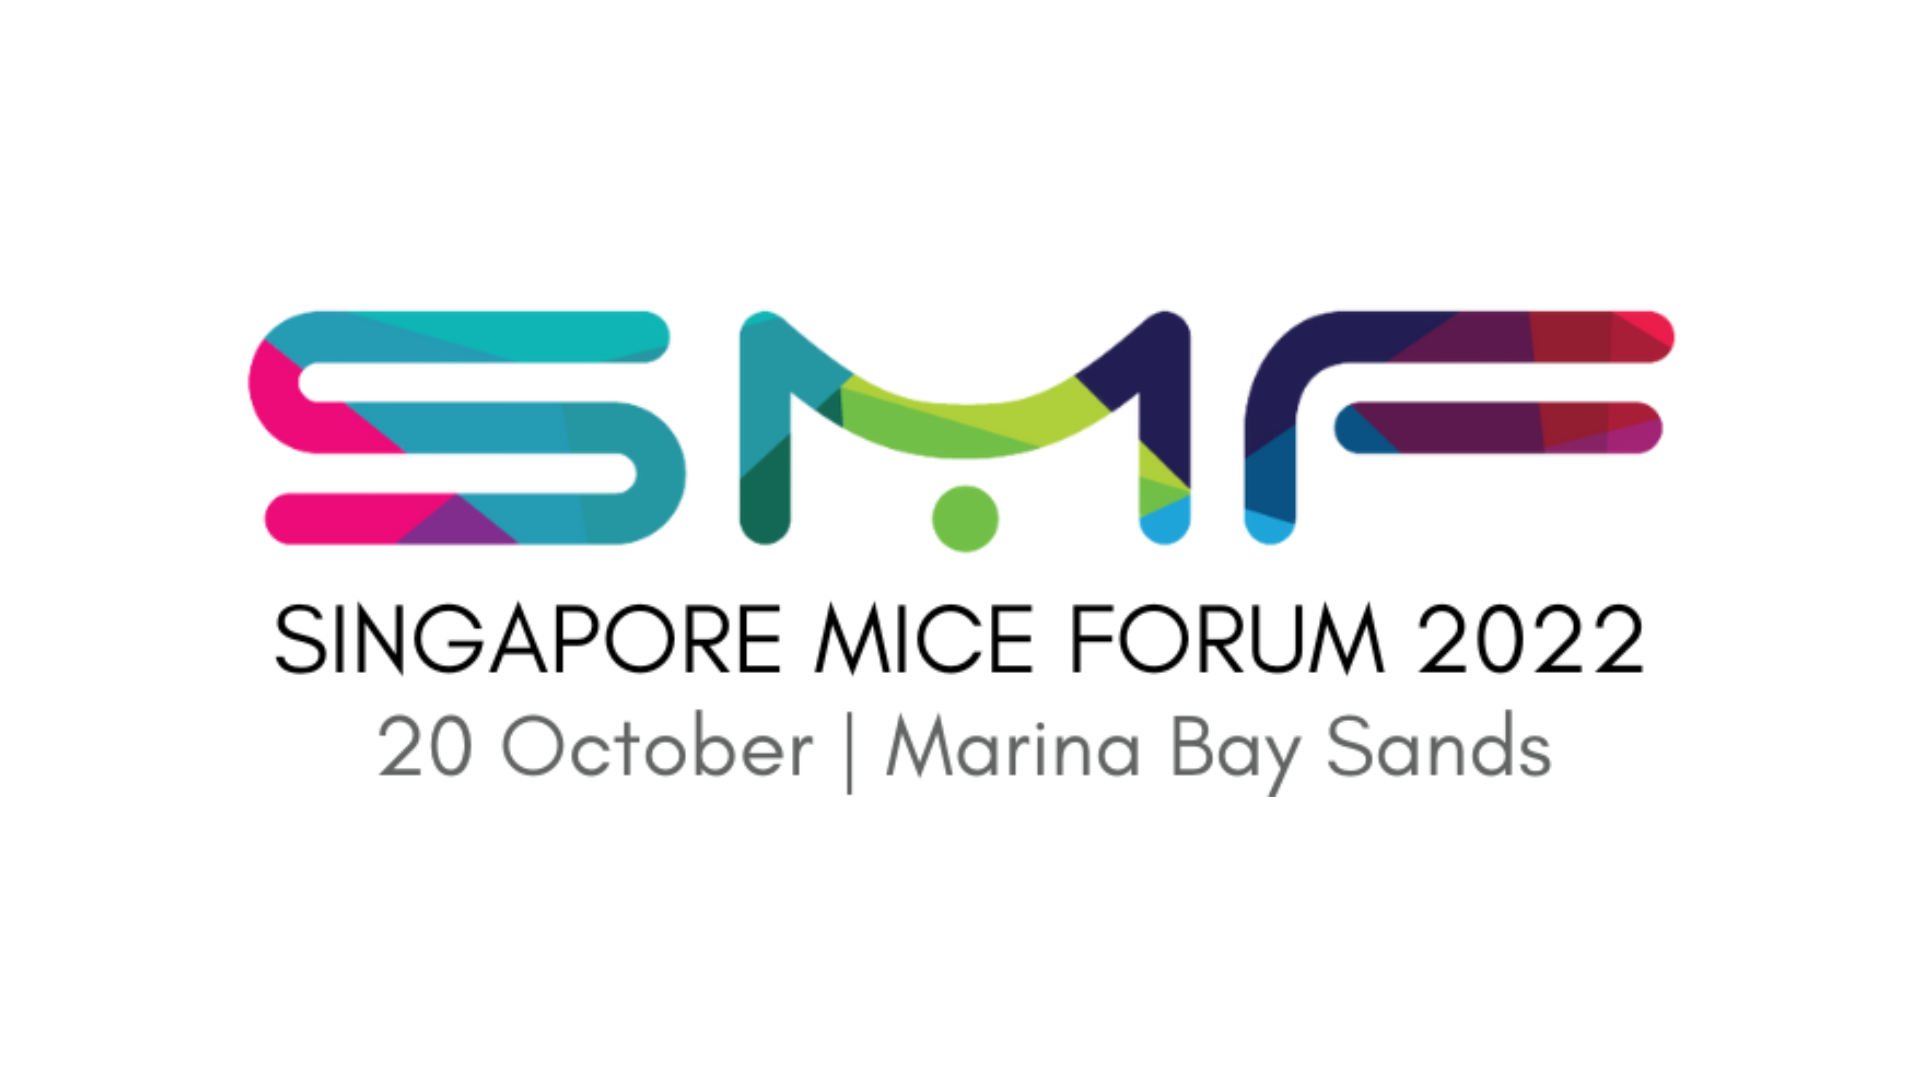 ITB Asia forms strategic partnership with SACEOS to host the Singapore MICE Forum (SMF) in October 2022